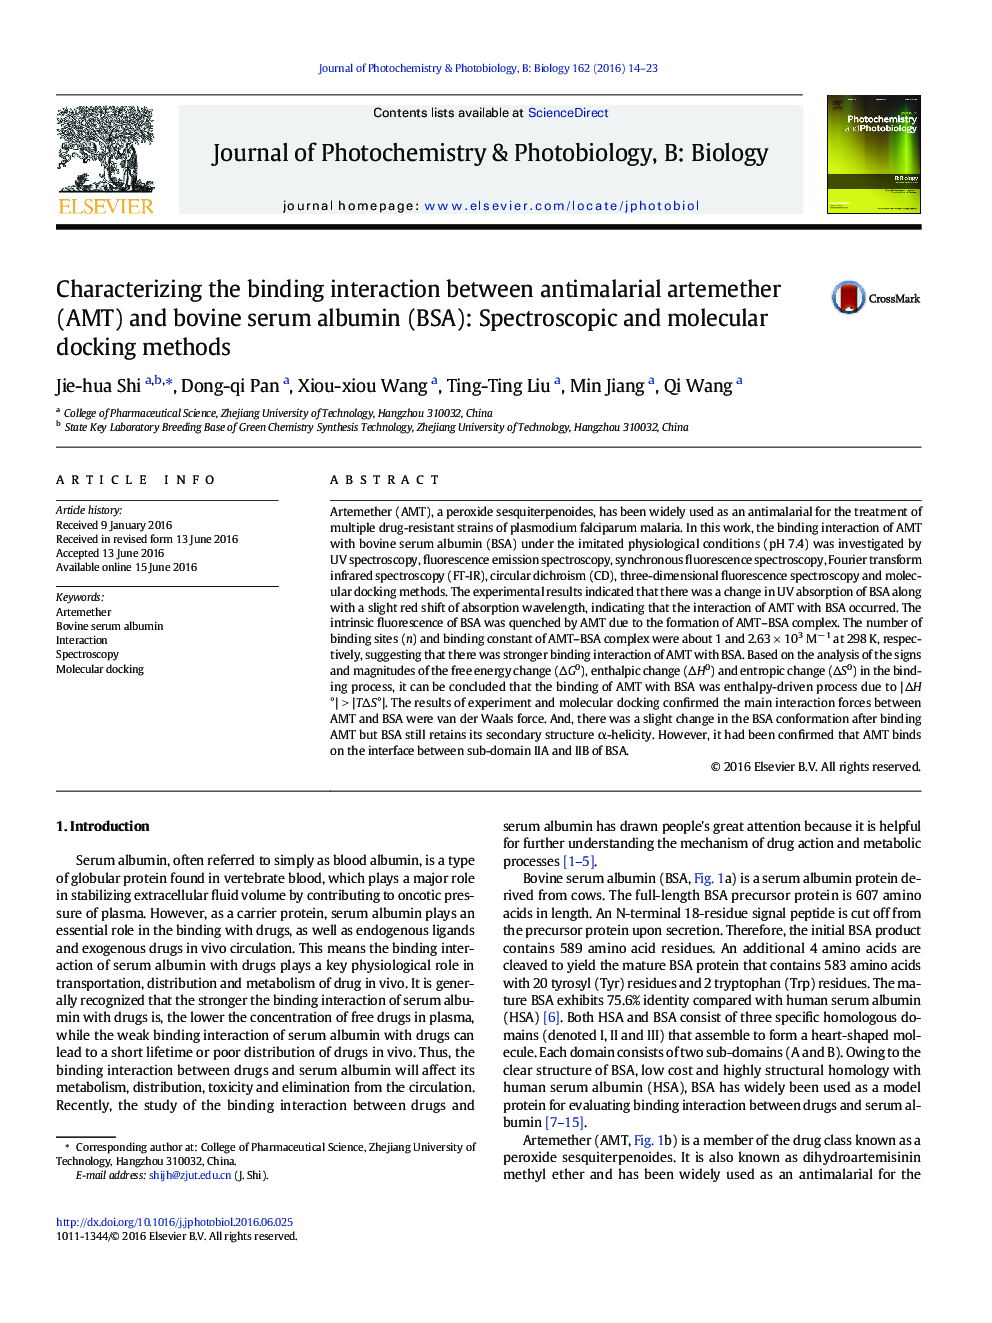 Characterizing the binding interaction between antimalarial artemether (AMT) and bovine serum albumin (BSA): Spectroscopic and molecular docking methods